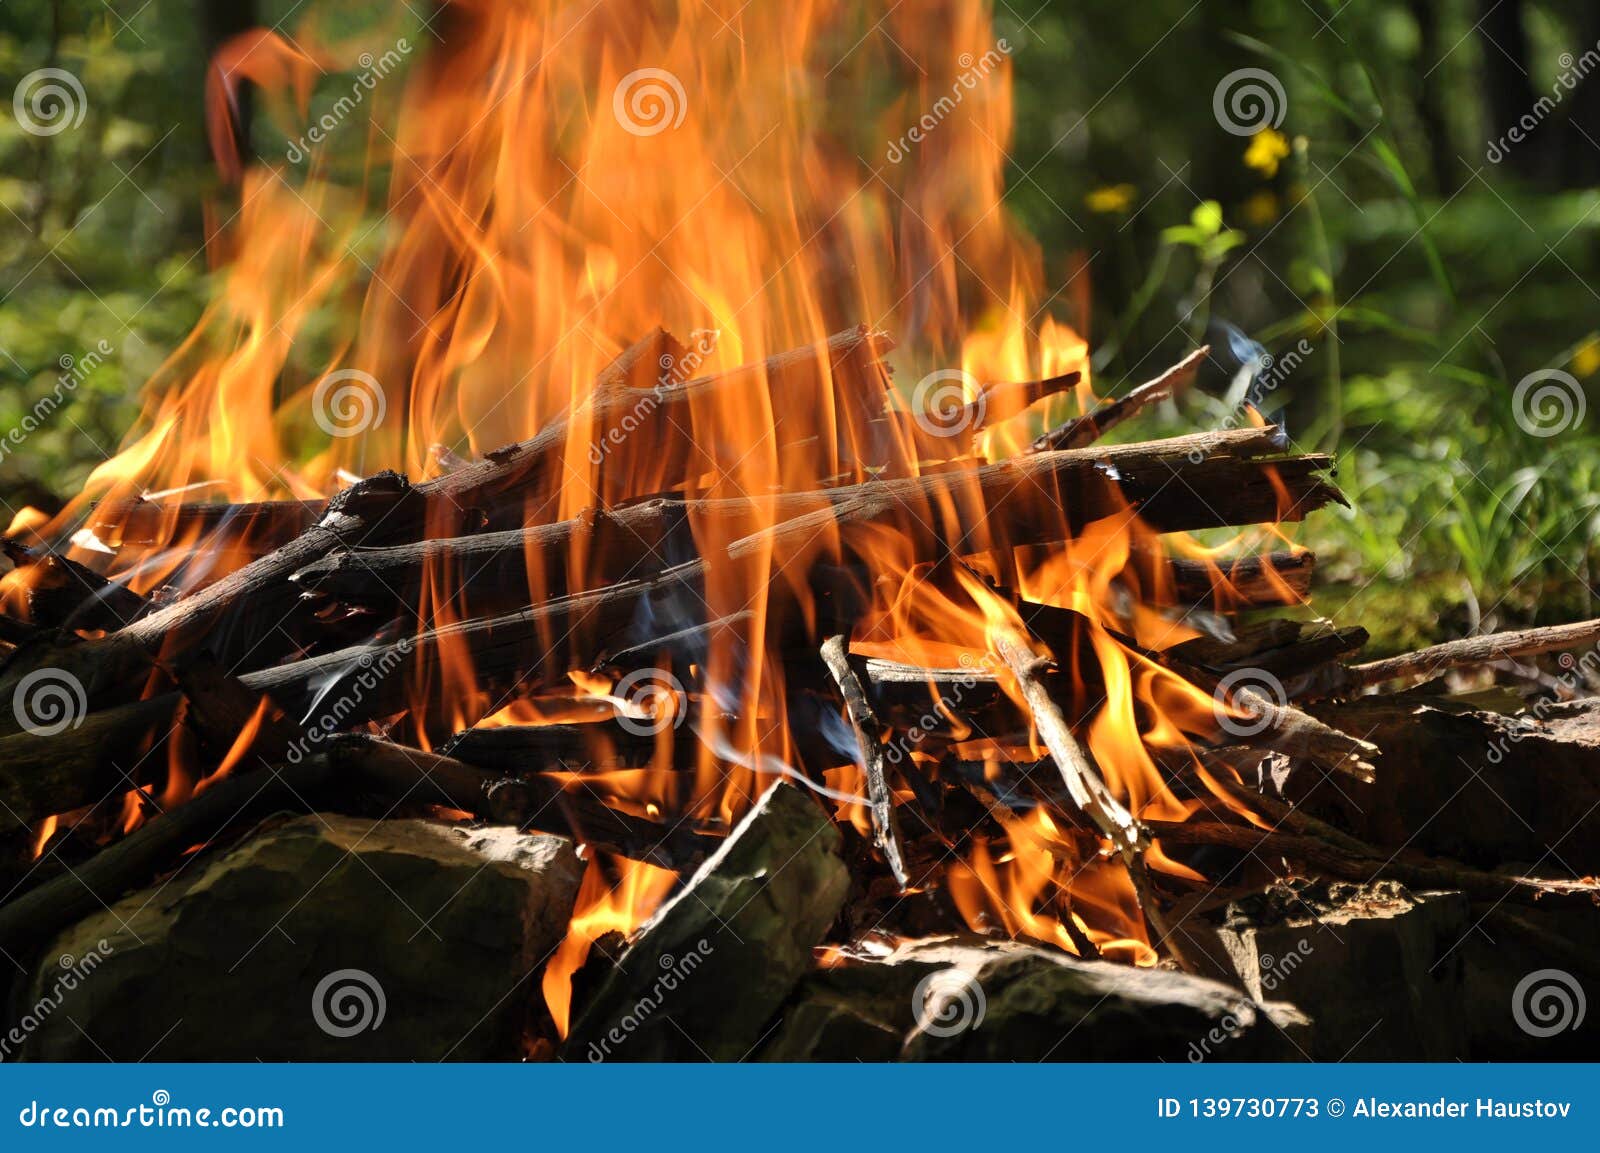 Beautiful Color of Burning Red Coals and Black Charred Wood Stock Image ...